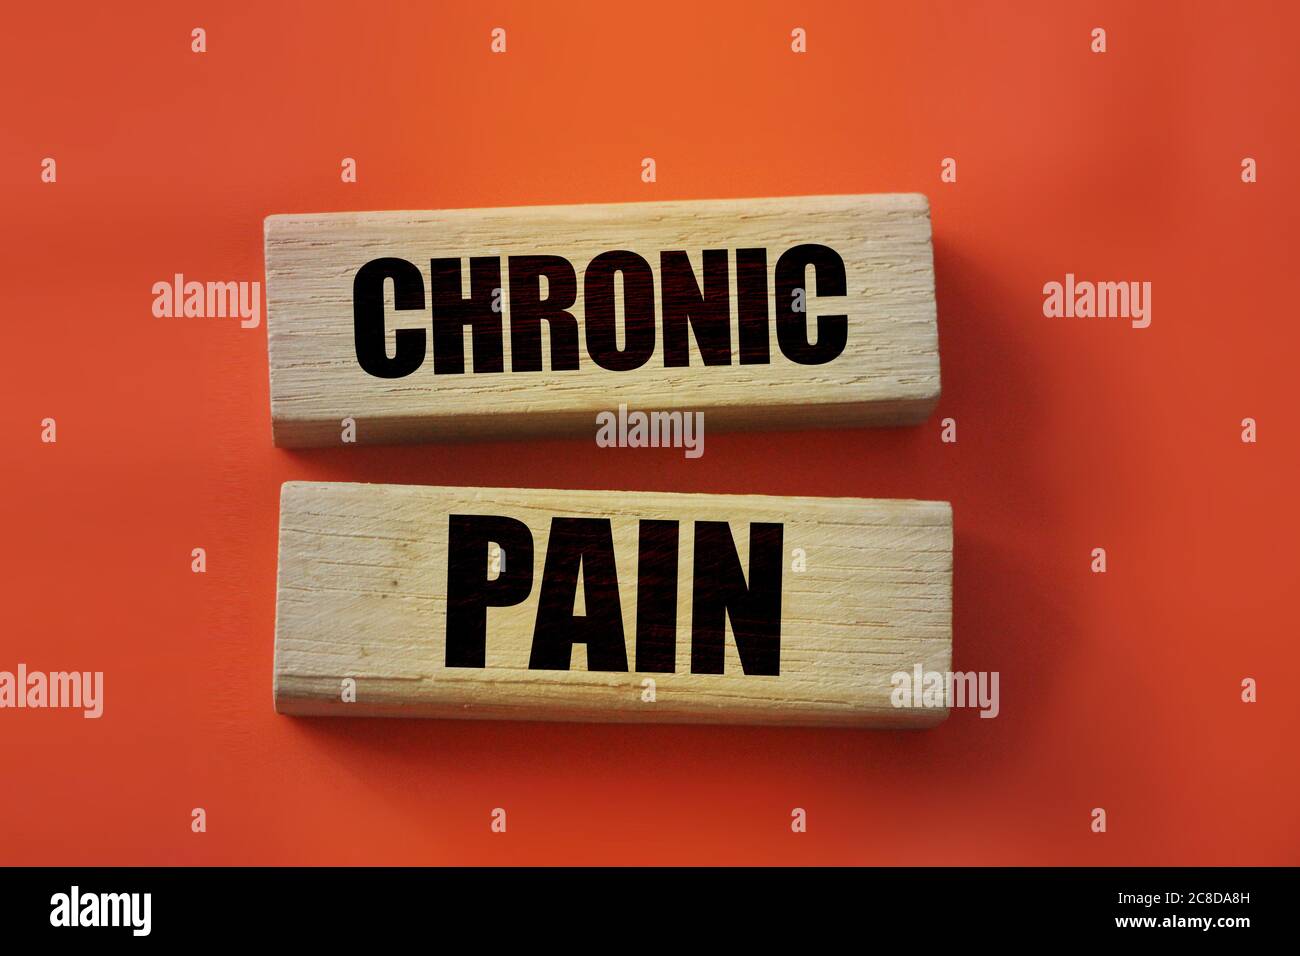 Chronic pain words on wooden blocks on red background. Medicine concept Stock Photo